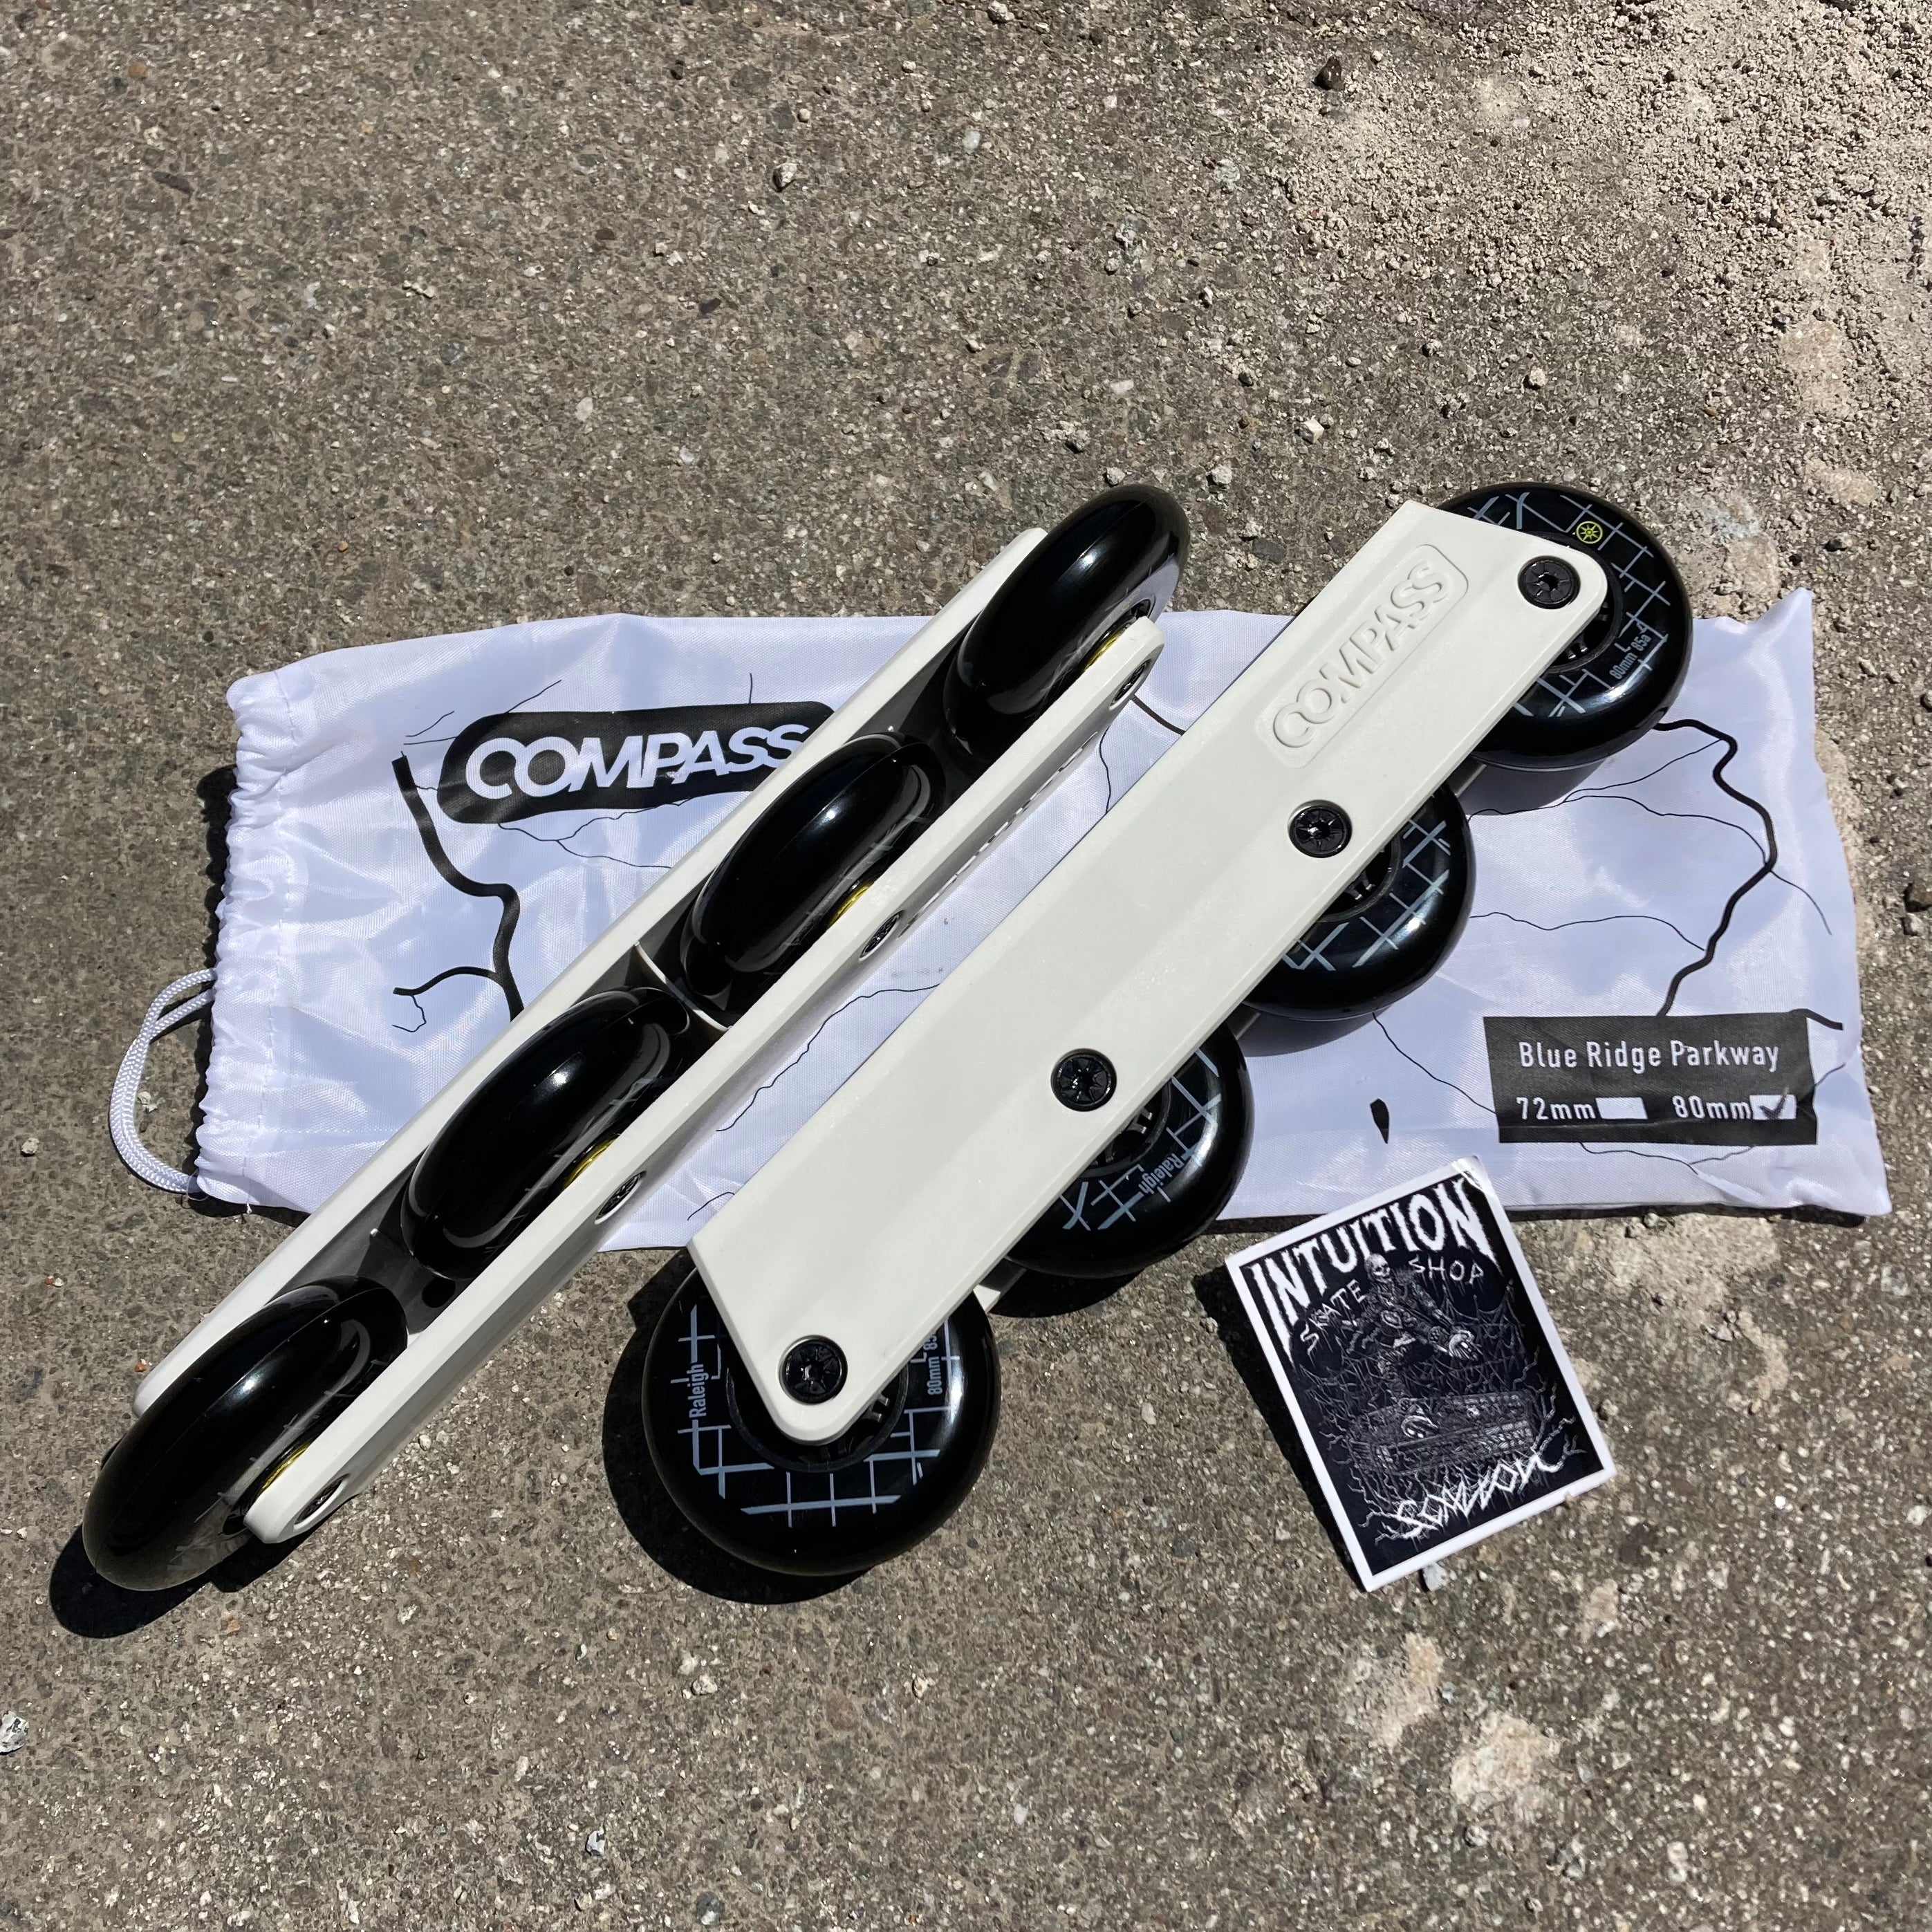 Compass 80mm Ready to Roll Inline Skate Frames, Intuition Skate Shop, Skate Shops Near Me, Bakersfield Rollerblades,